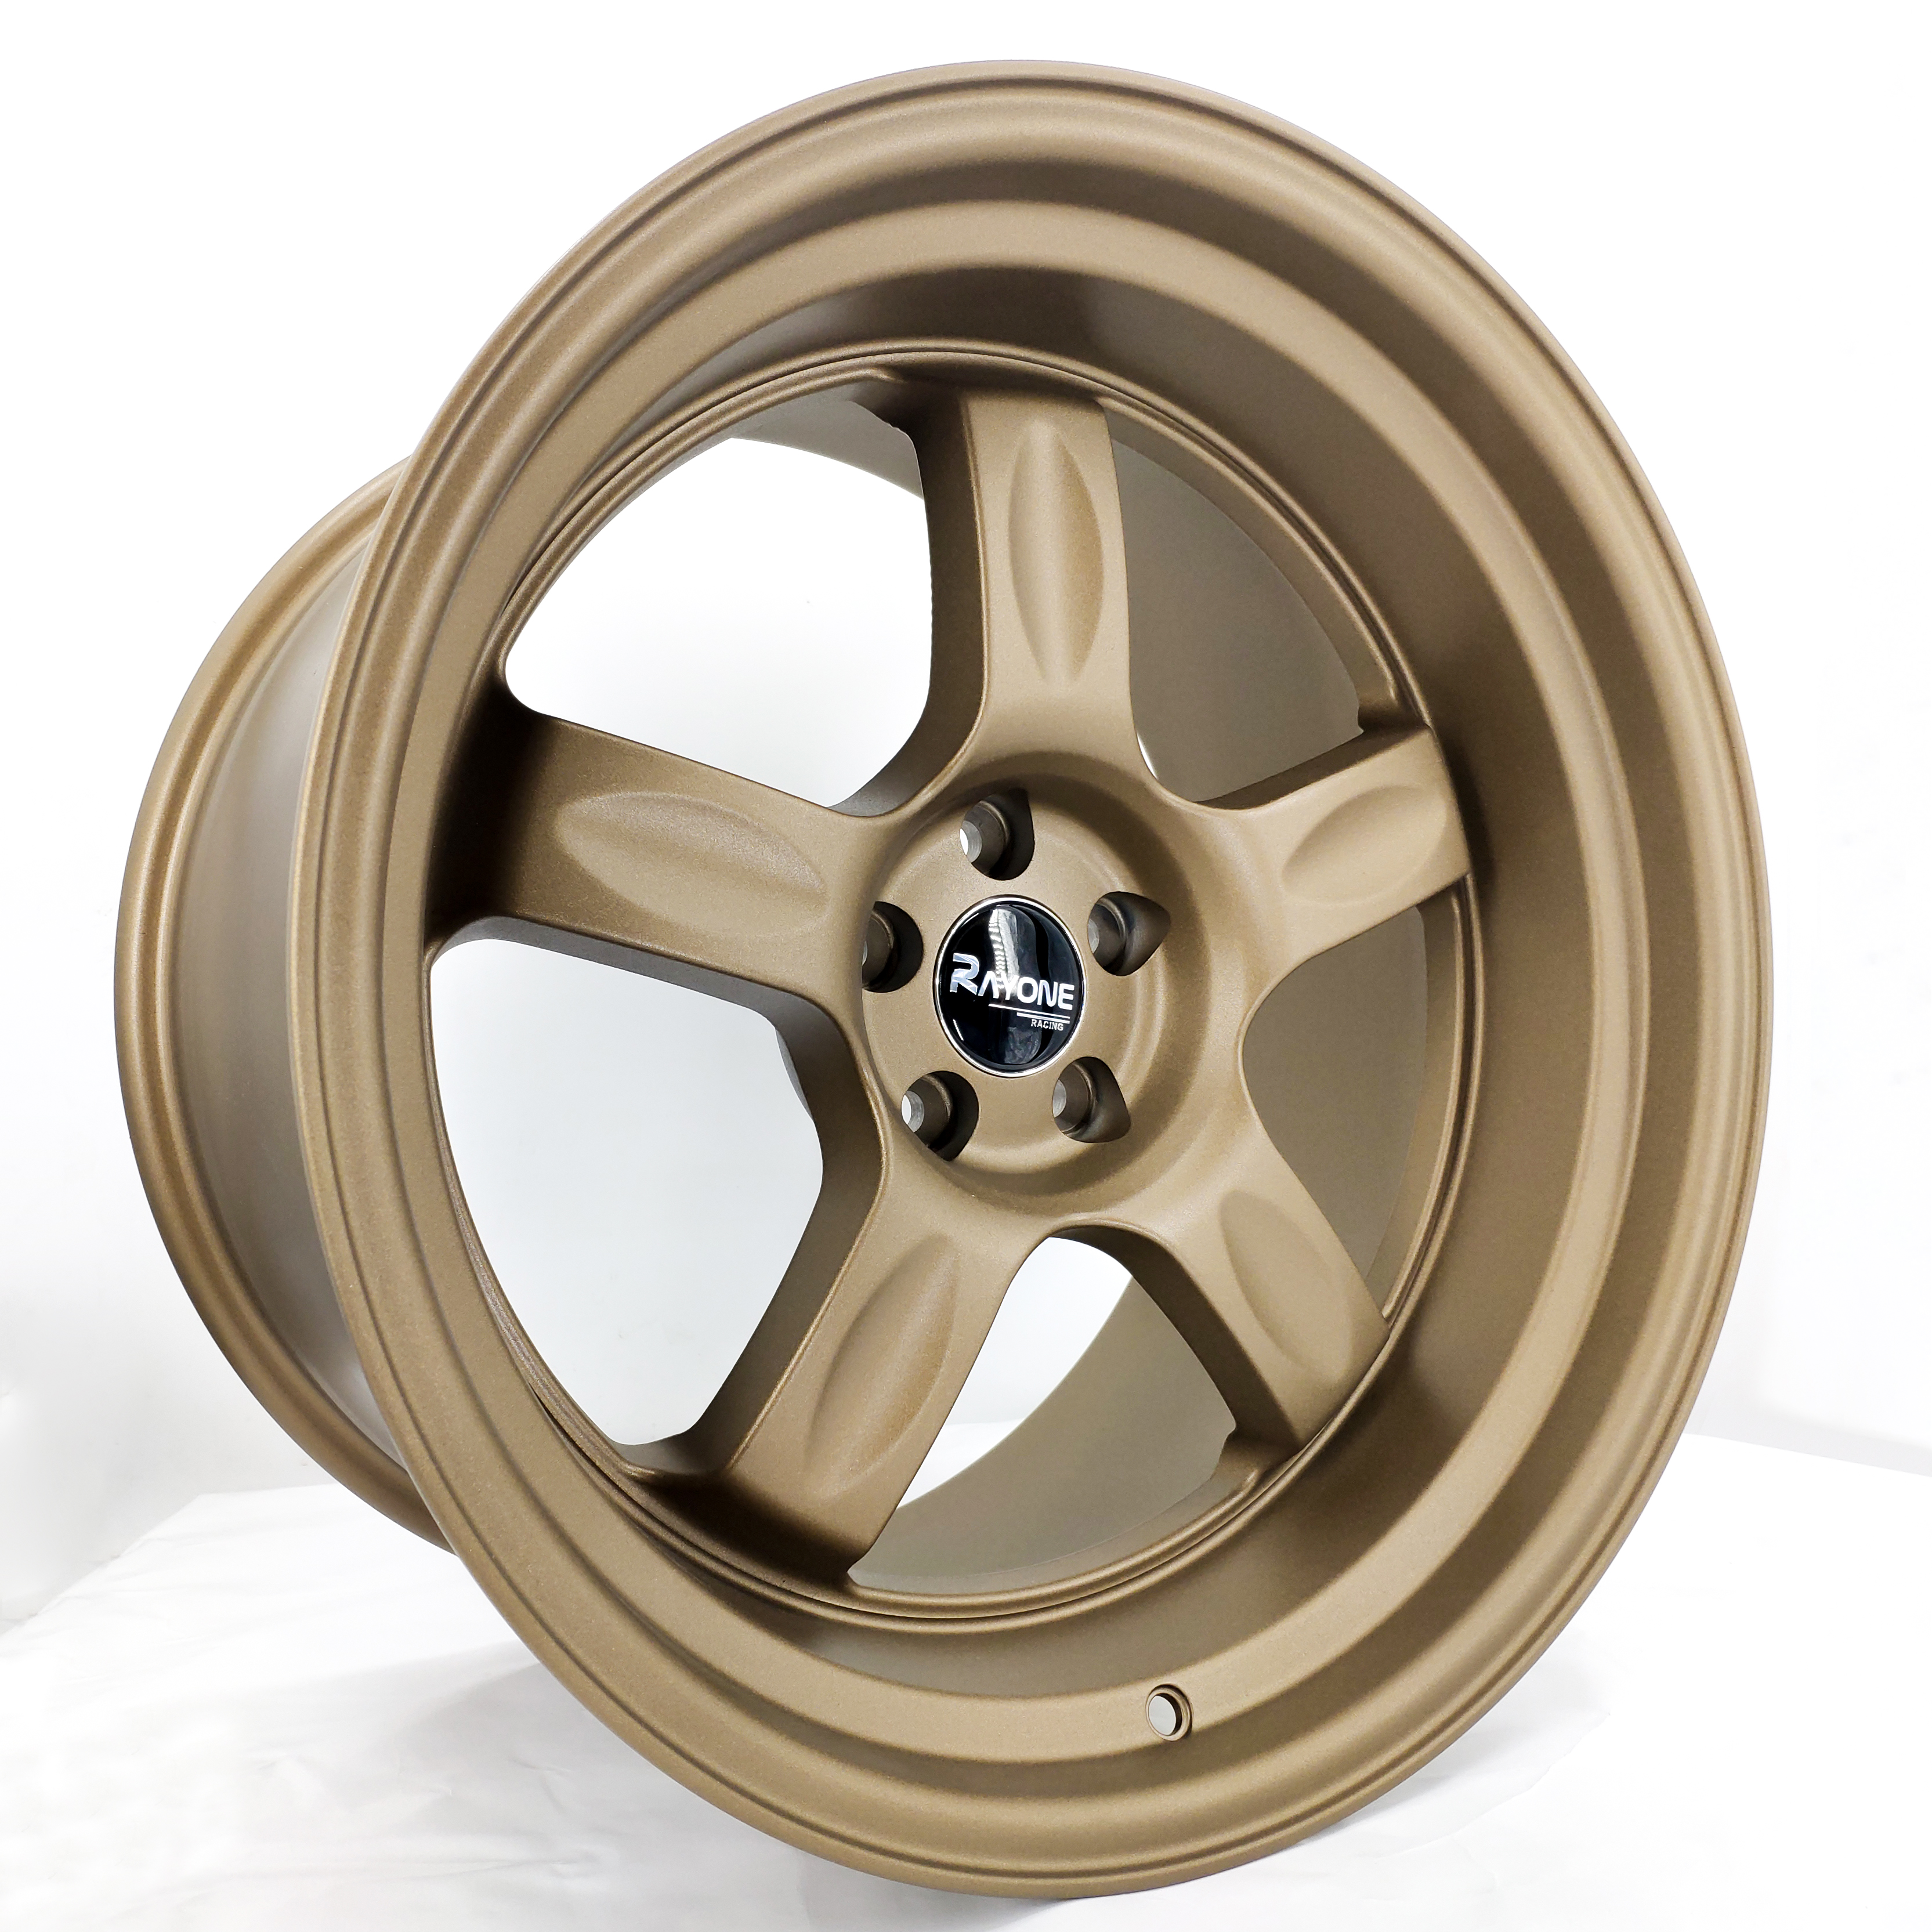 Rapid Delivery for Pro Drag Forged Series Wheels - Rayone’s New Design 17/18inch 5 Spoke Aftermarket Rims – Rayone